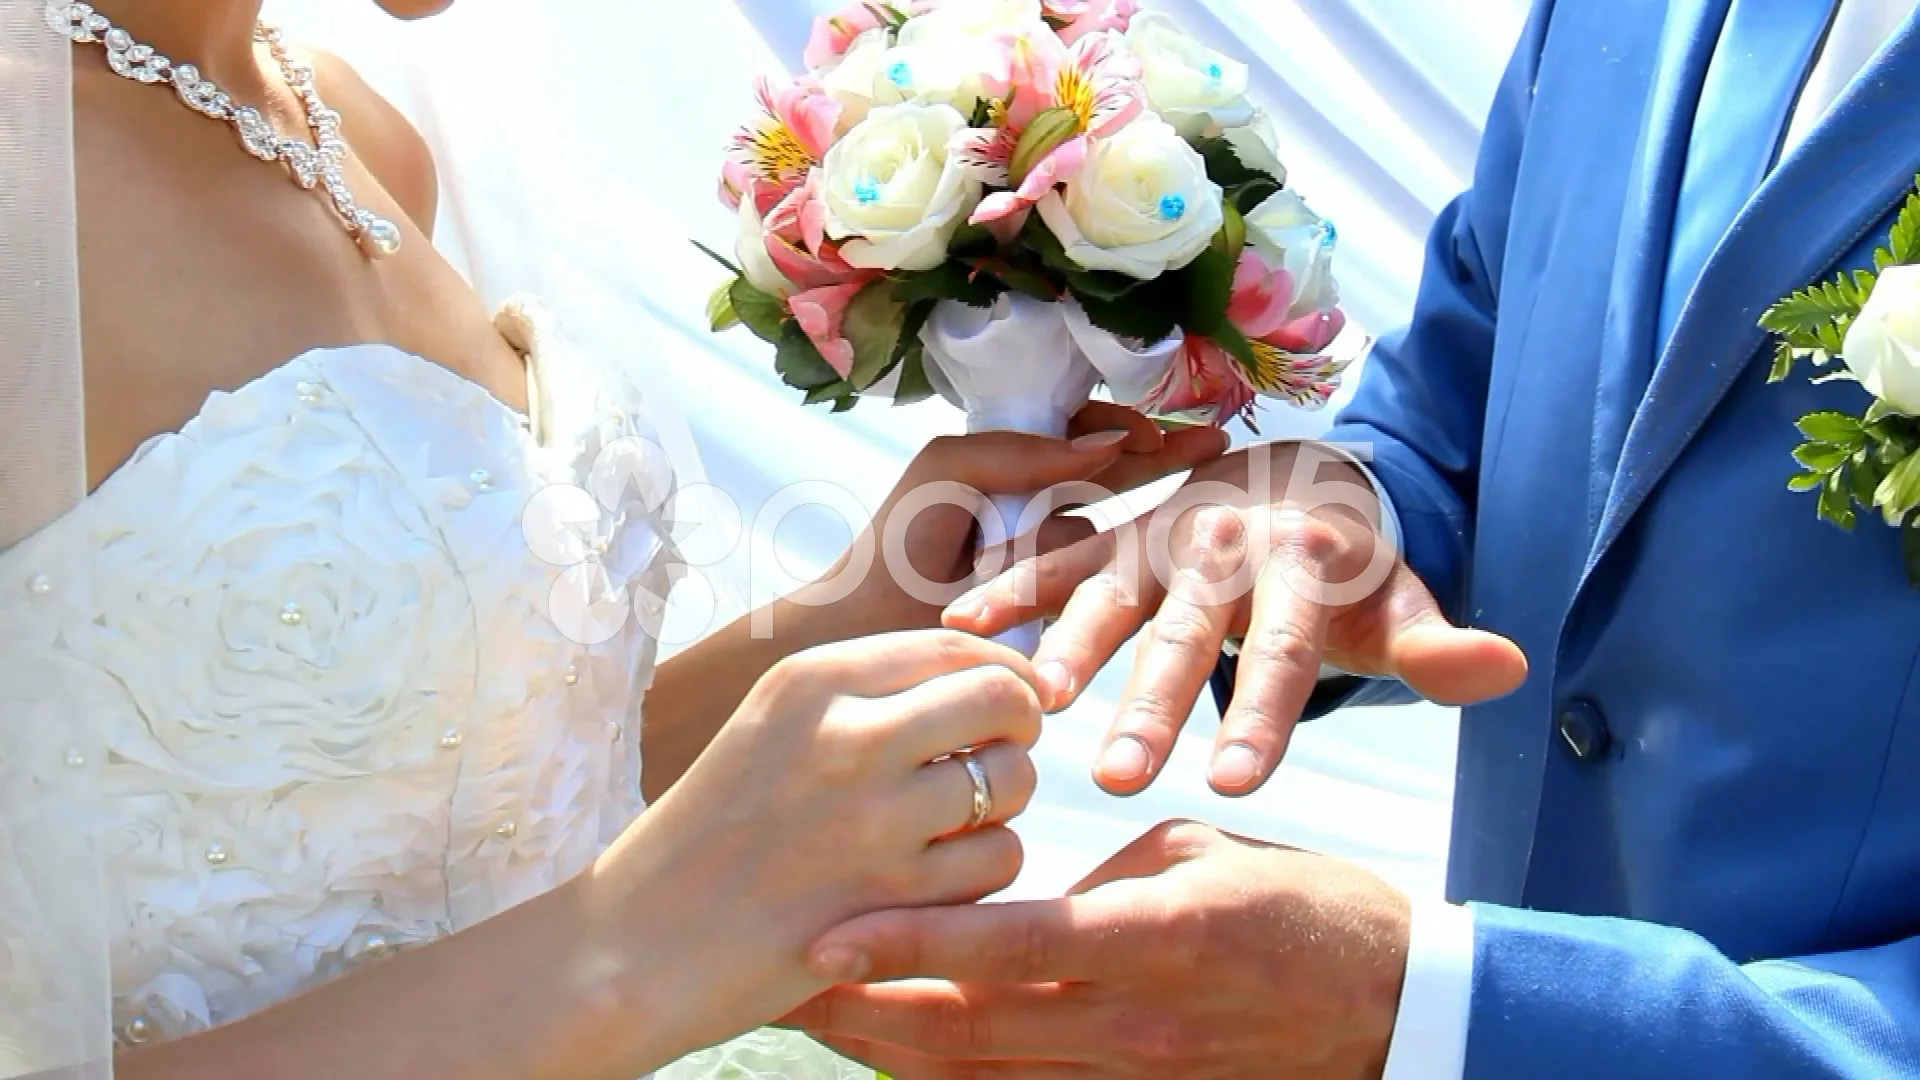 2560x1707 PNG images, hands, wedding gown, ceremony, bride, marriage,  wedding band, ring, hand, bridal, wedding ceremony, married, beautiful,  gown, wedding bands, holding rings, wedding ring, lace, wedding, HD  Wallpaper | Rare Gallery